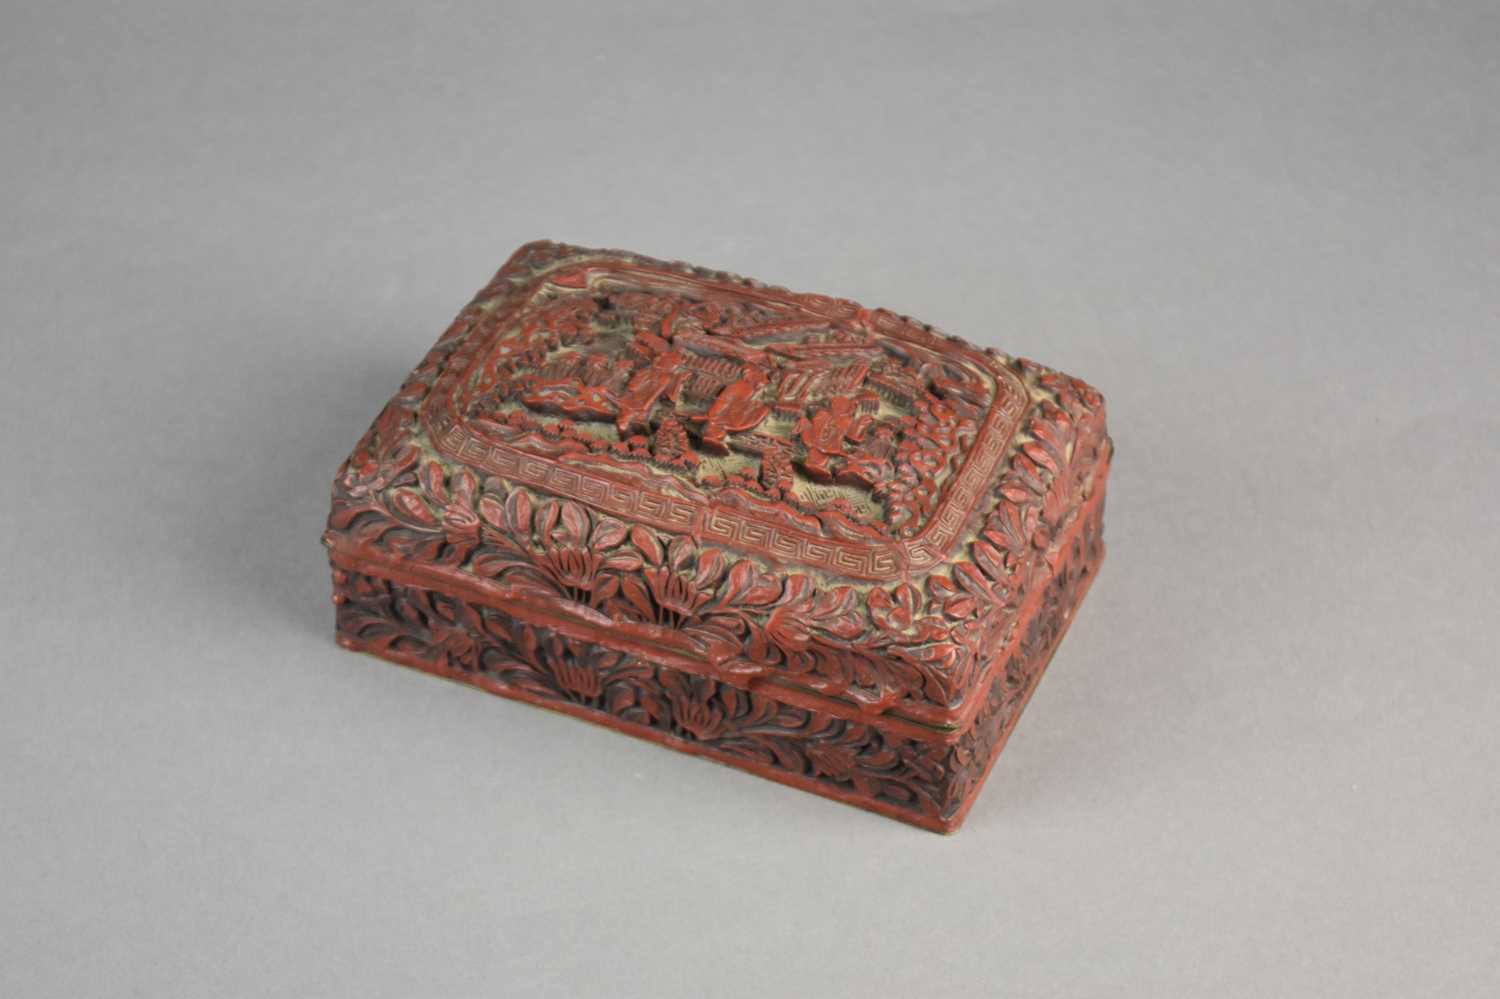 A Chinese cinnabar lacquer box and cover, Republic period